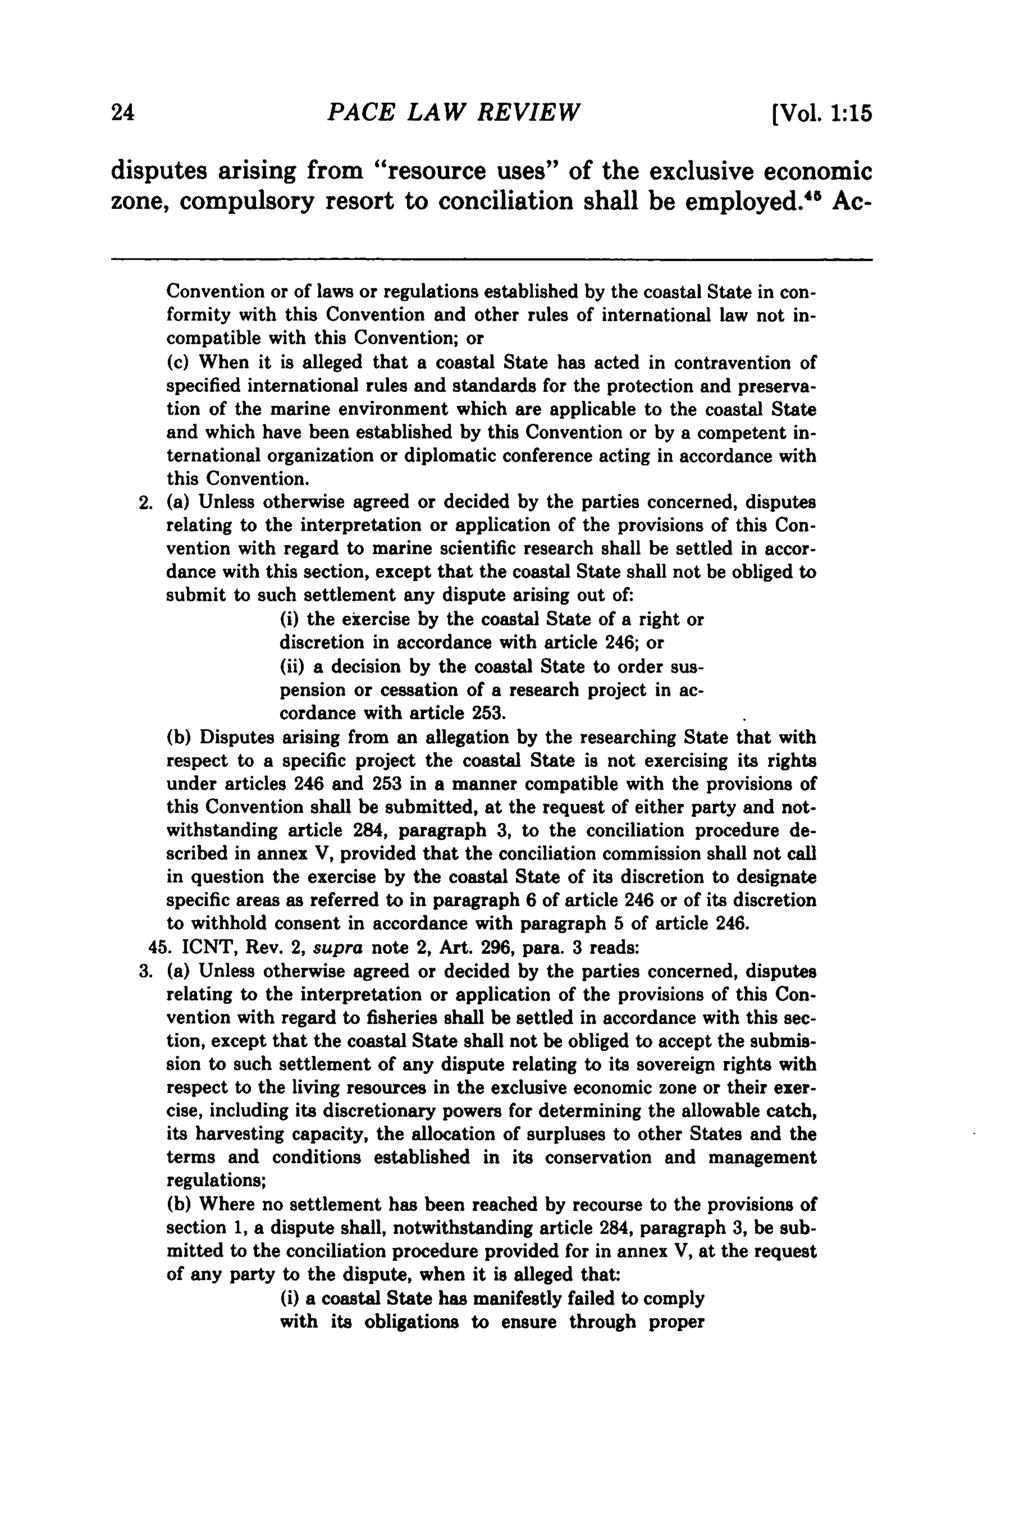 PACE LAW REVIEW [Vol. 1:15 disputes arising from "resource uses" of the exclusive economic zone, compulsory resort to conciliation shall be employed.